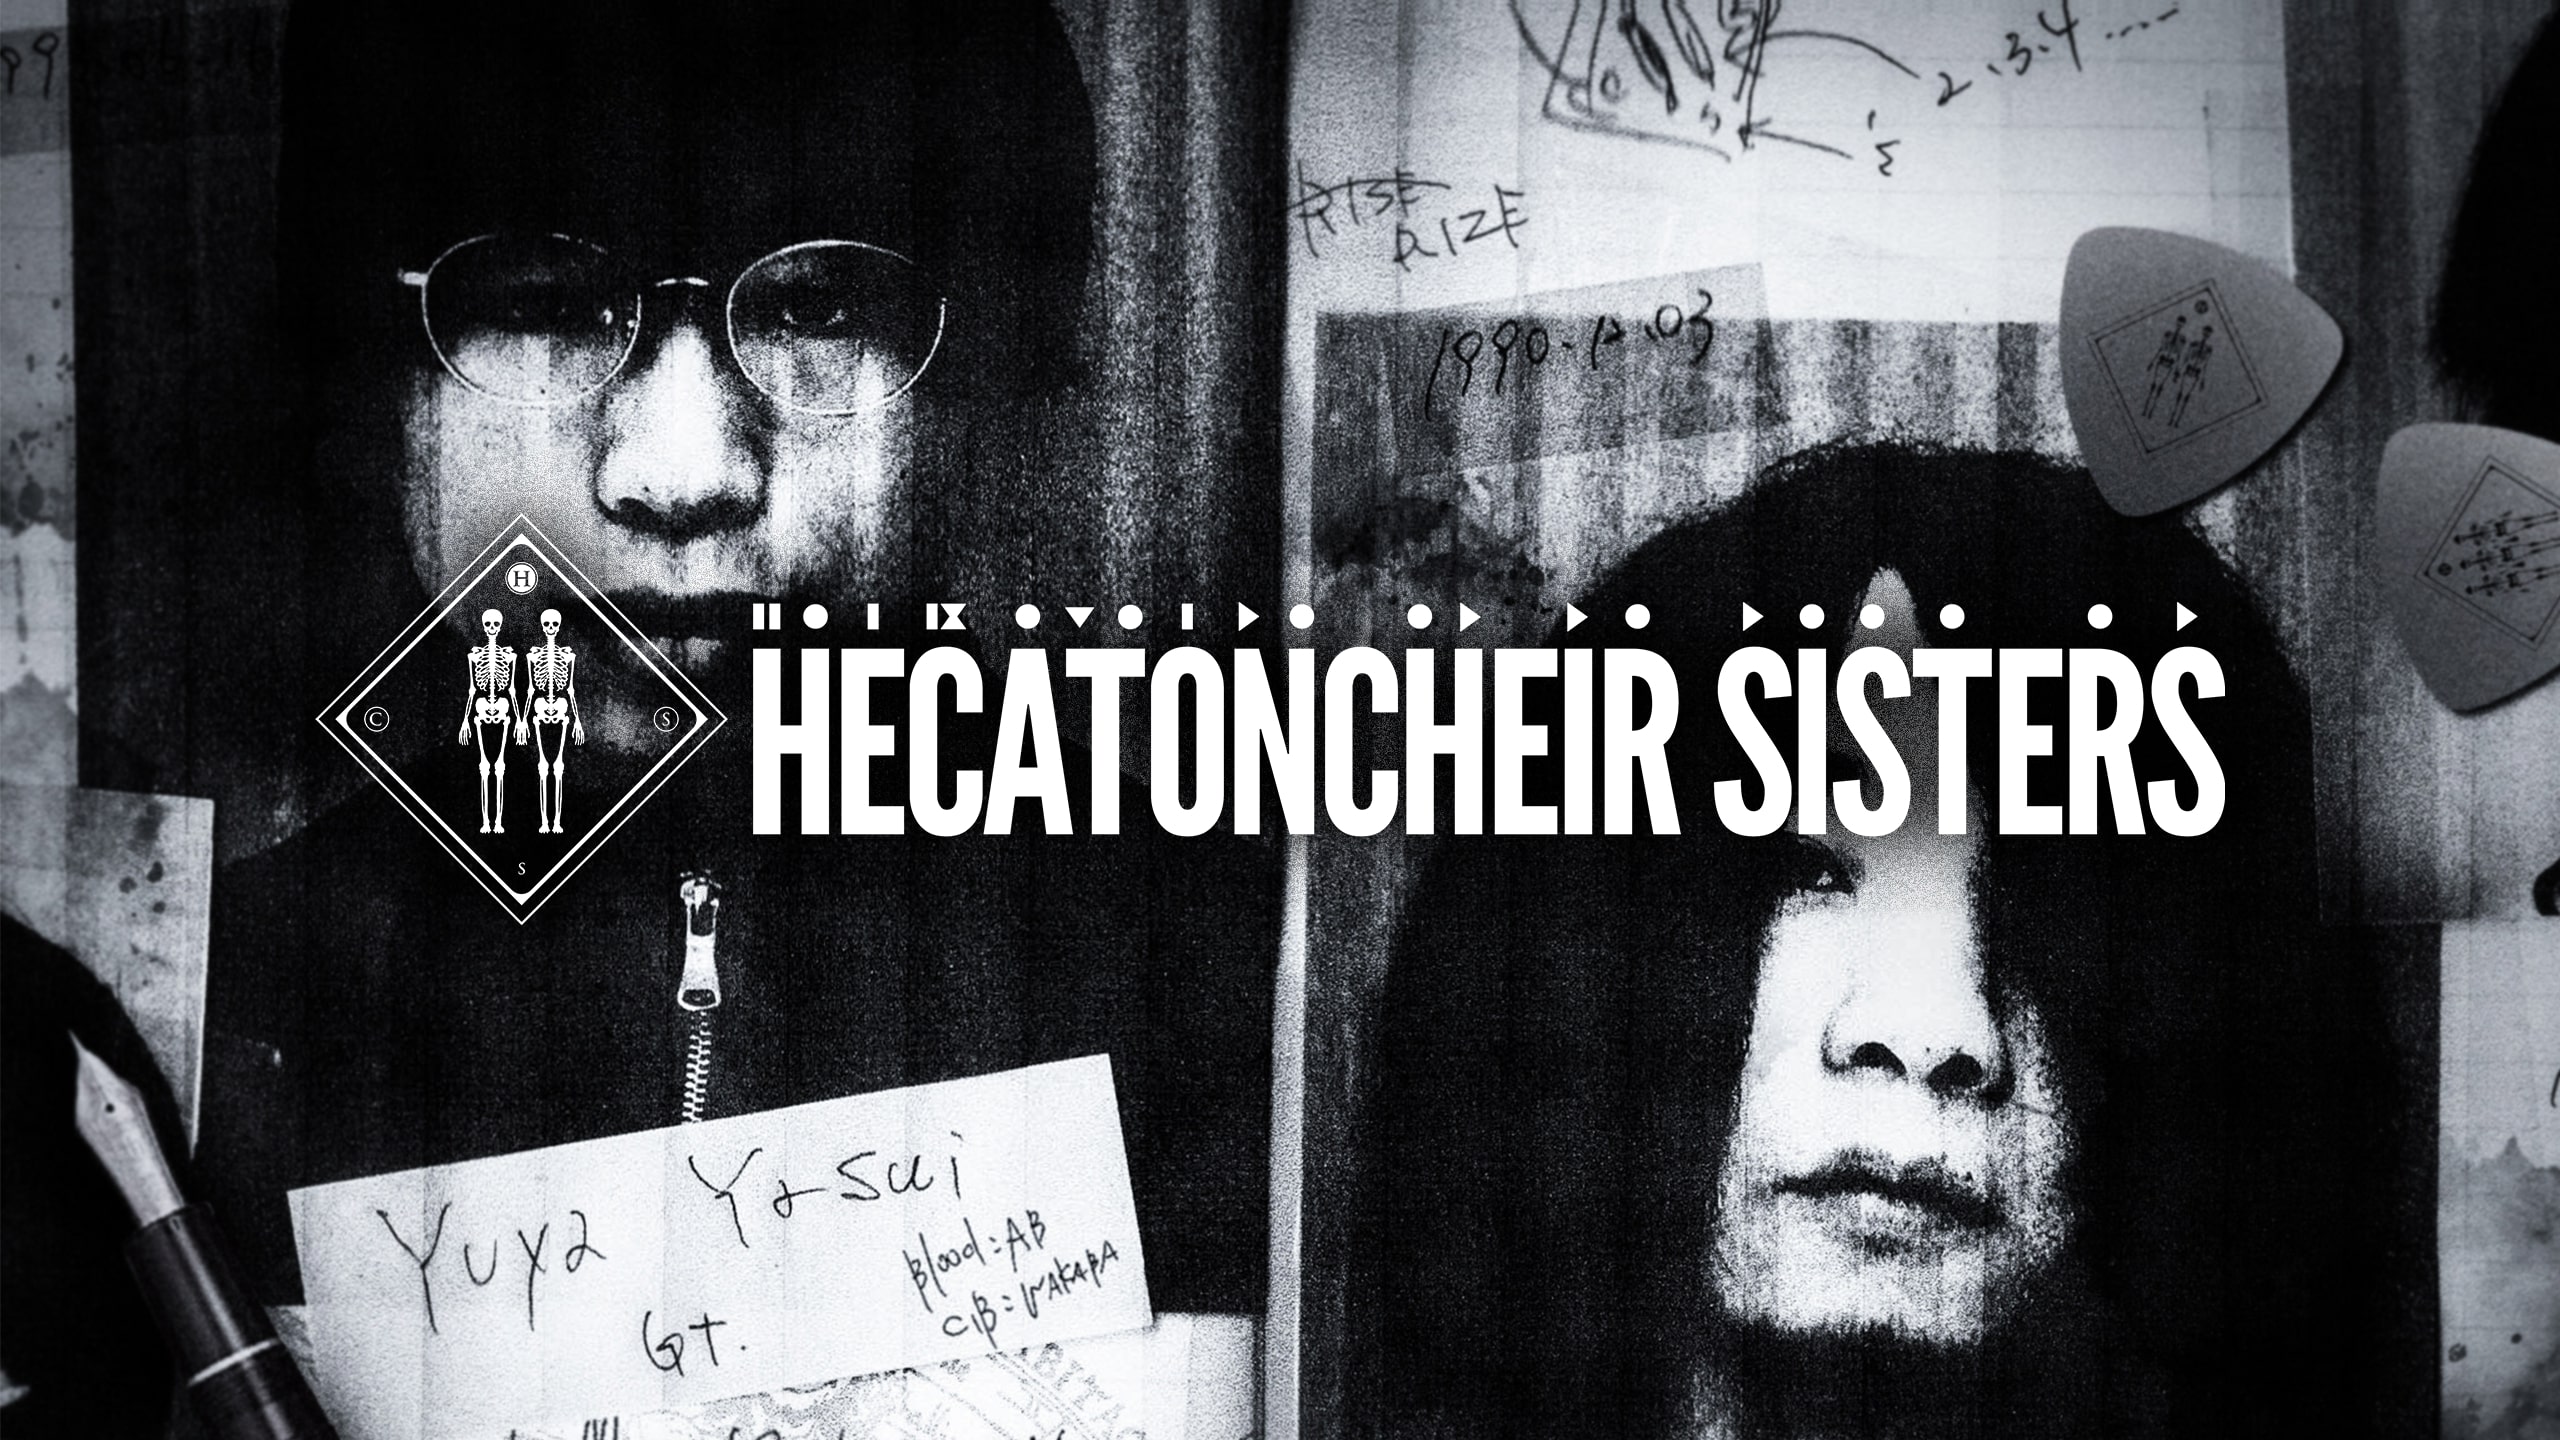 About Hecatoncheir sisters